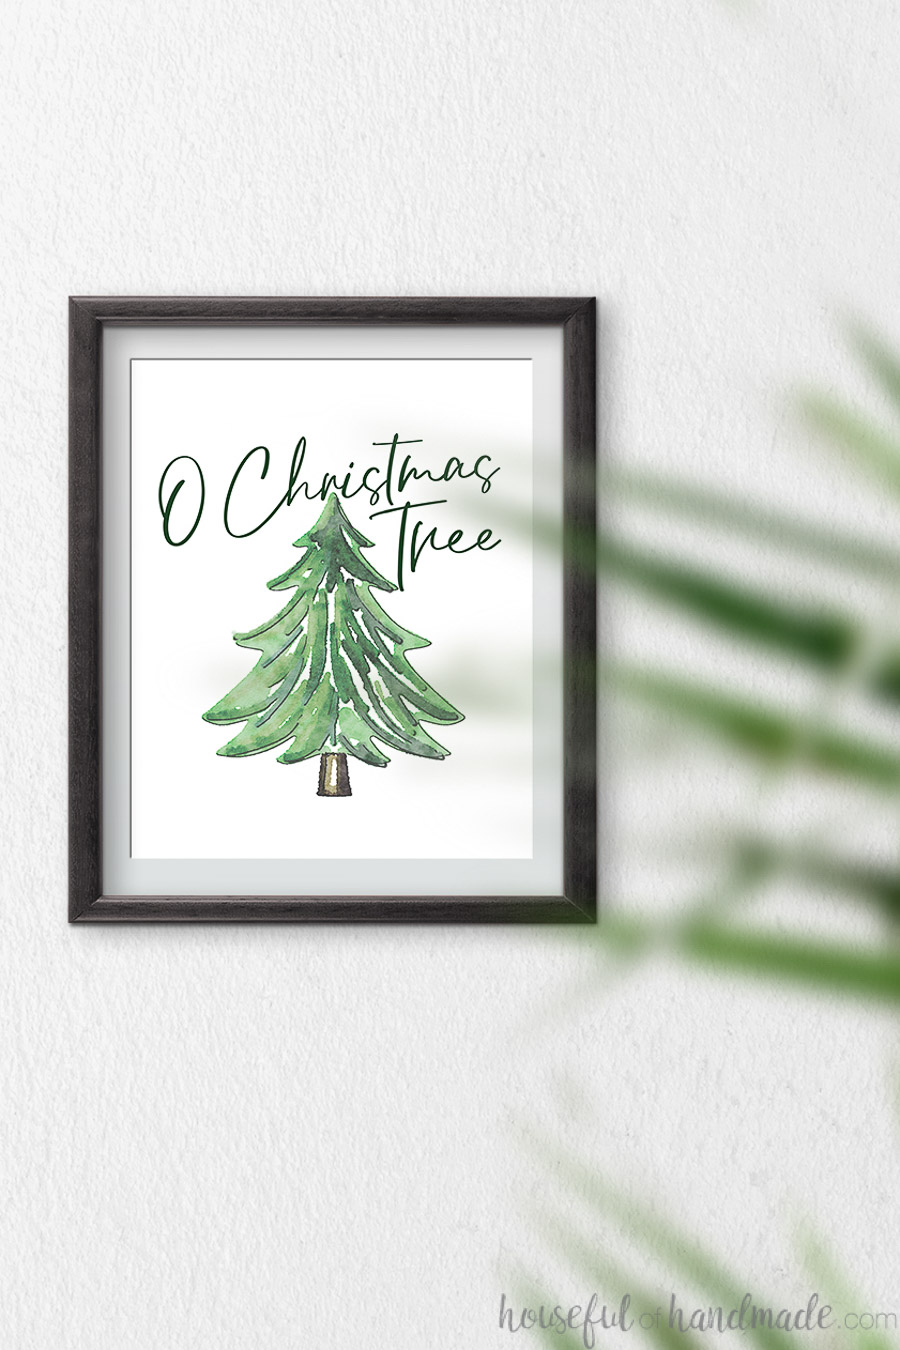 O Christmas Tree script font over the top of a watercolor pine tree as a Christmas art print.